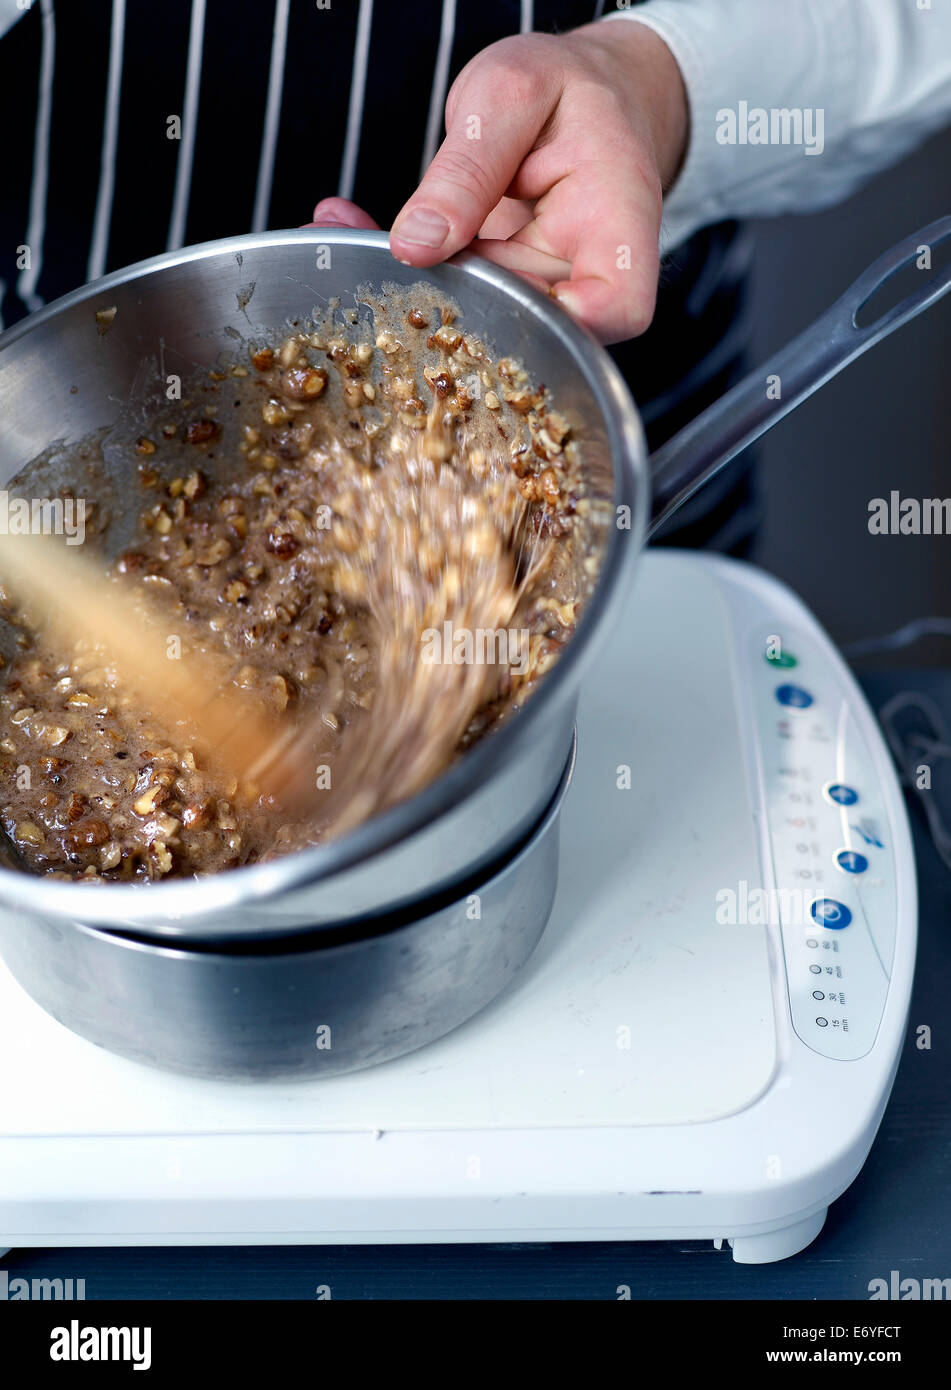 Energetically mixing the ingredients Stock Photo